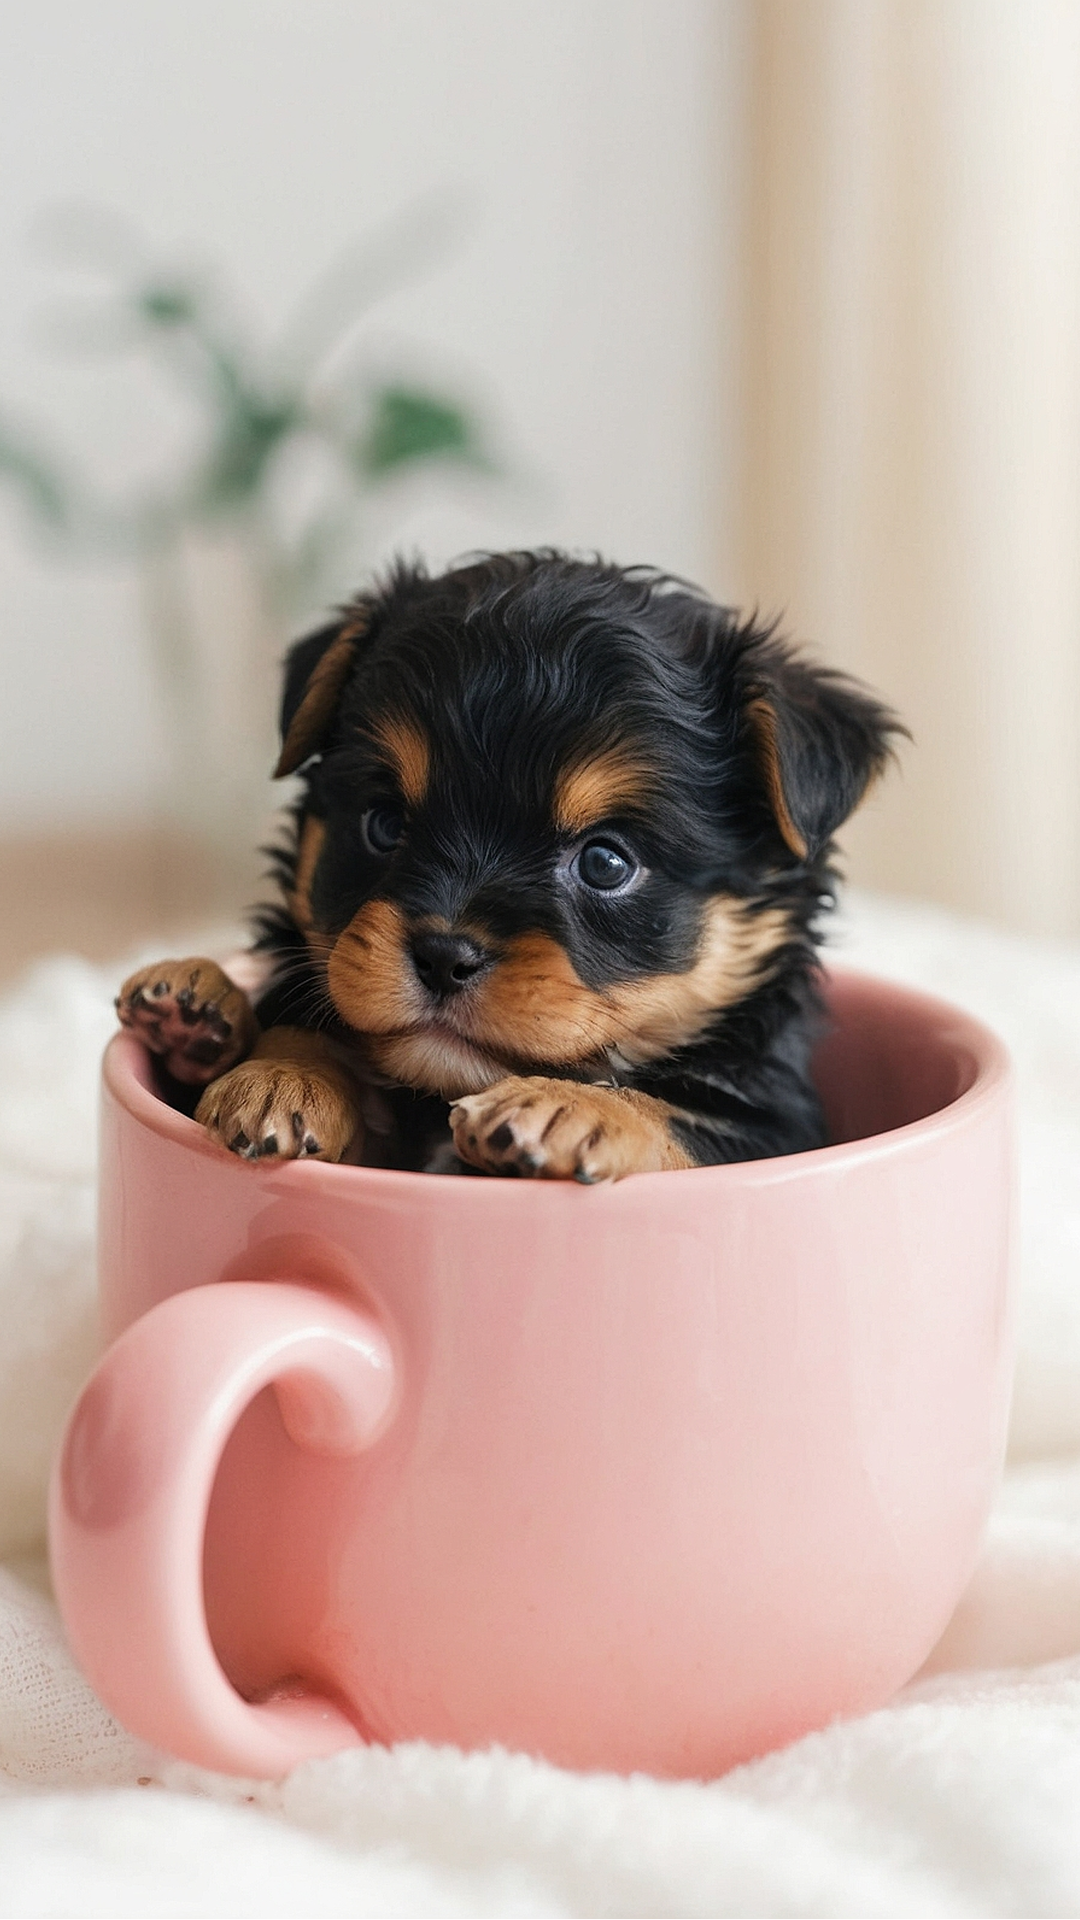 Teeny Paws and Floppy Ears: Adorable Teacup Puppies